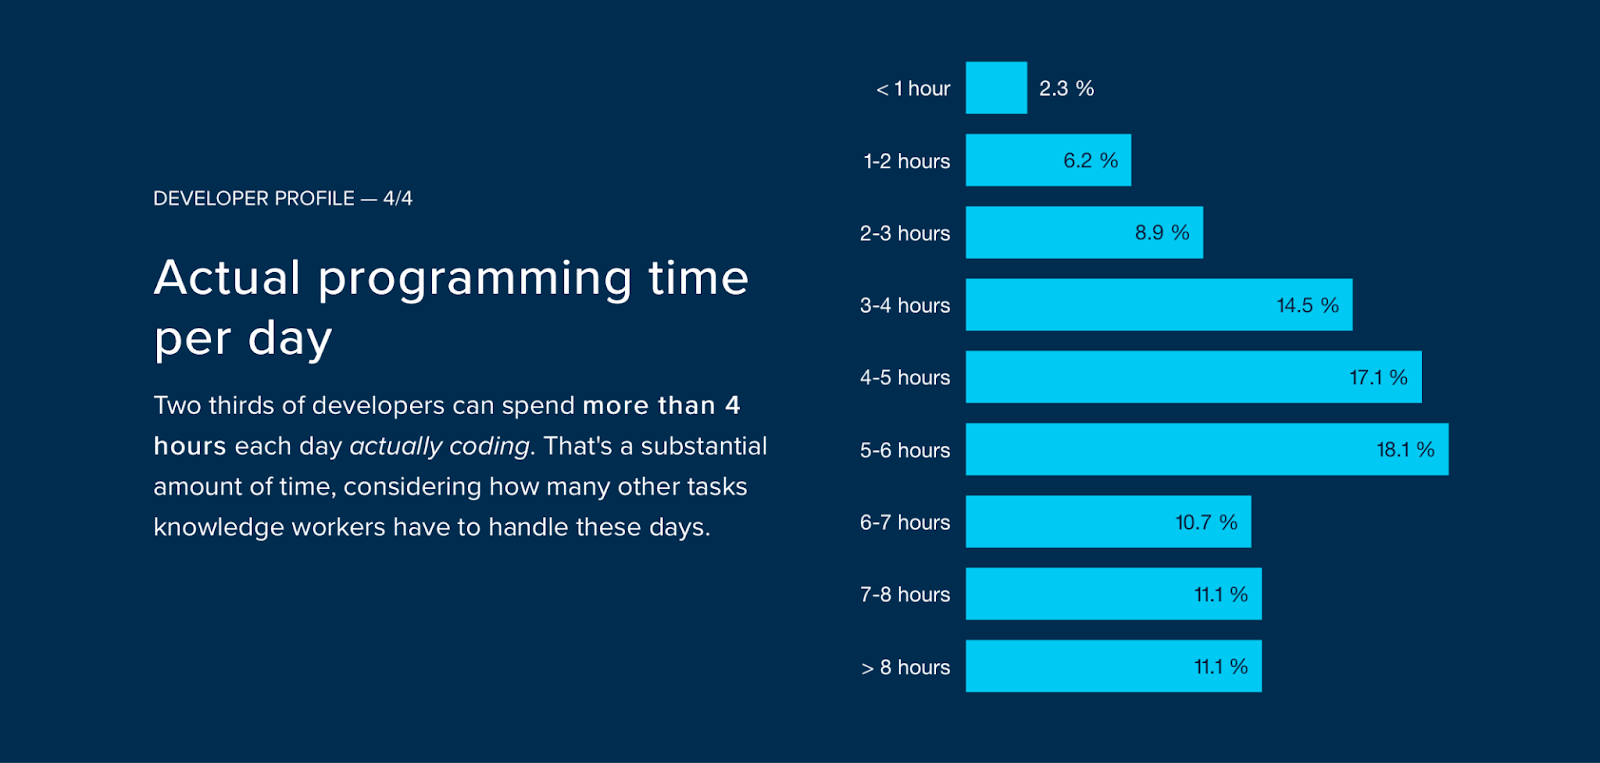 Bar chart showing actual programming time per day.